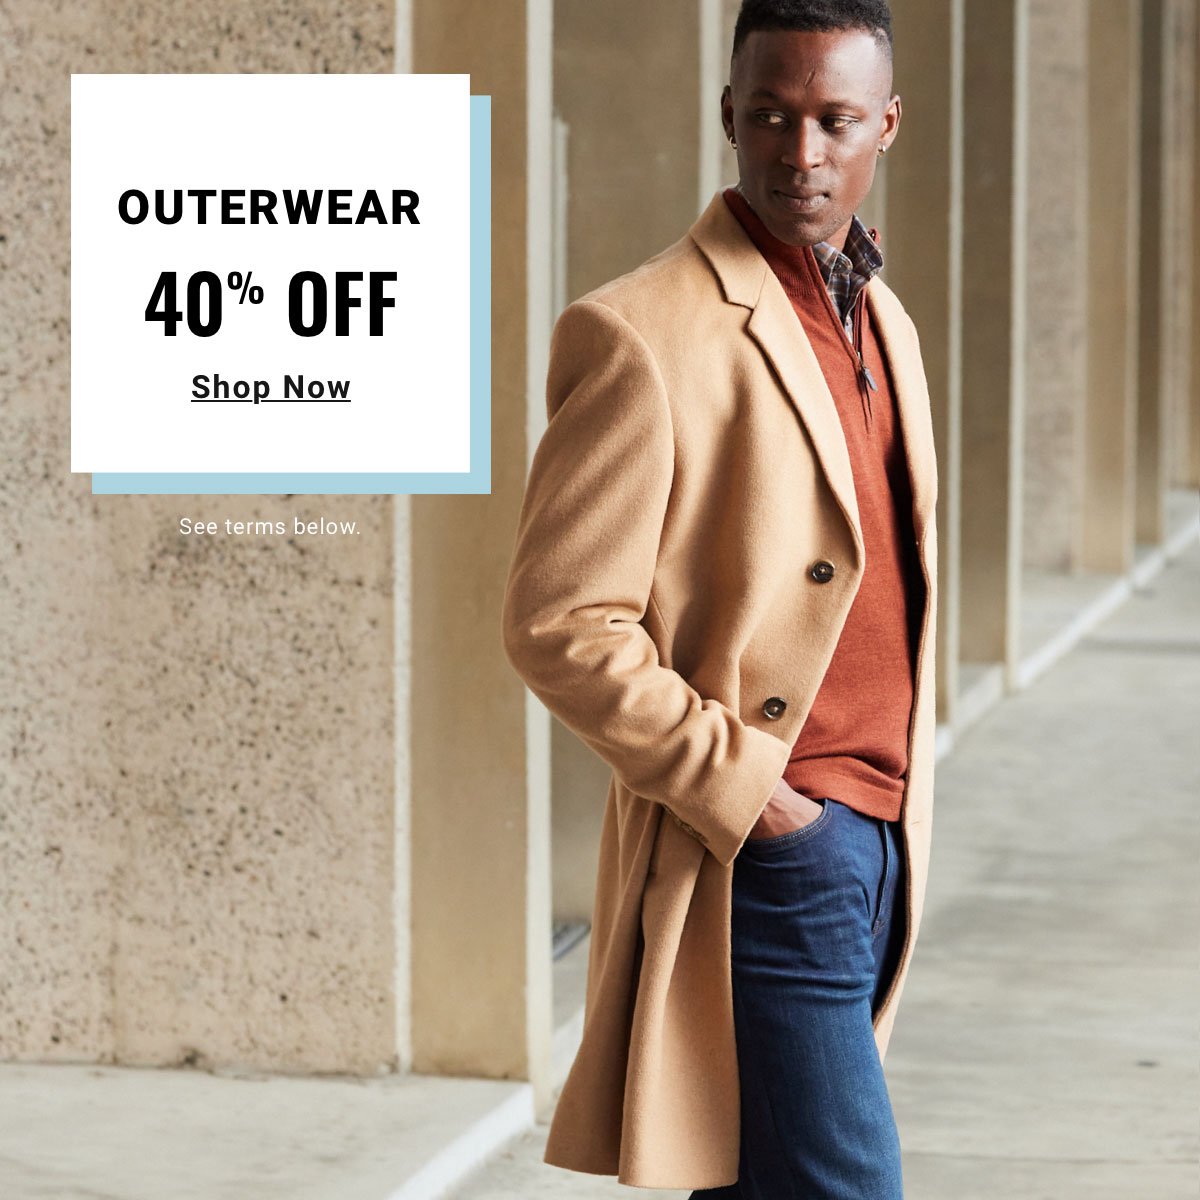 Outerwear 40% Off Shop Now